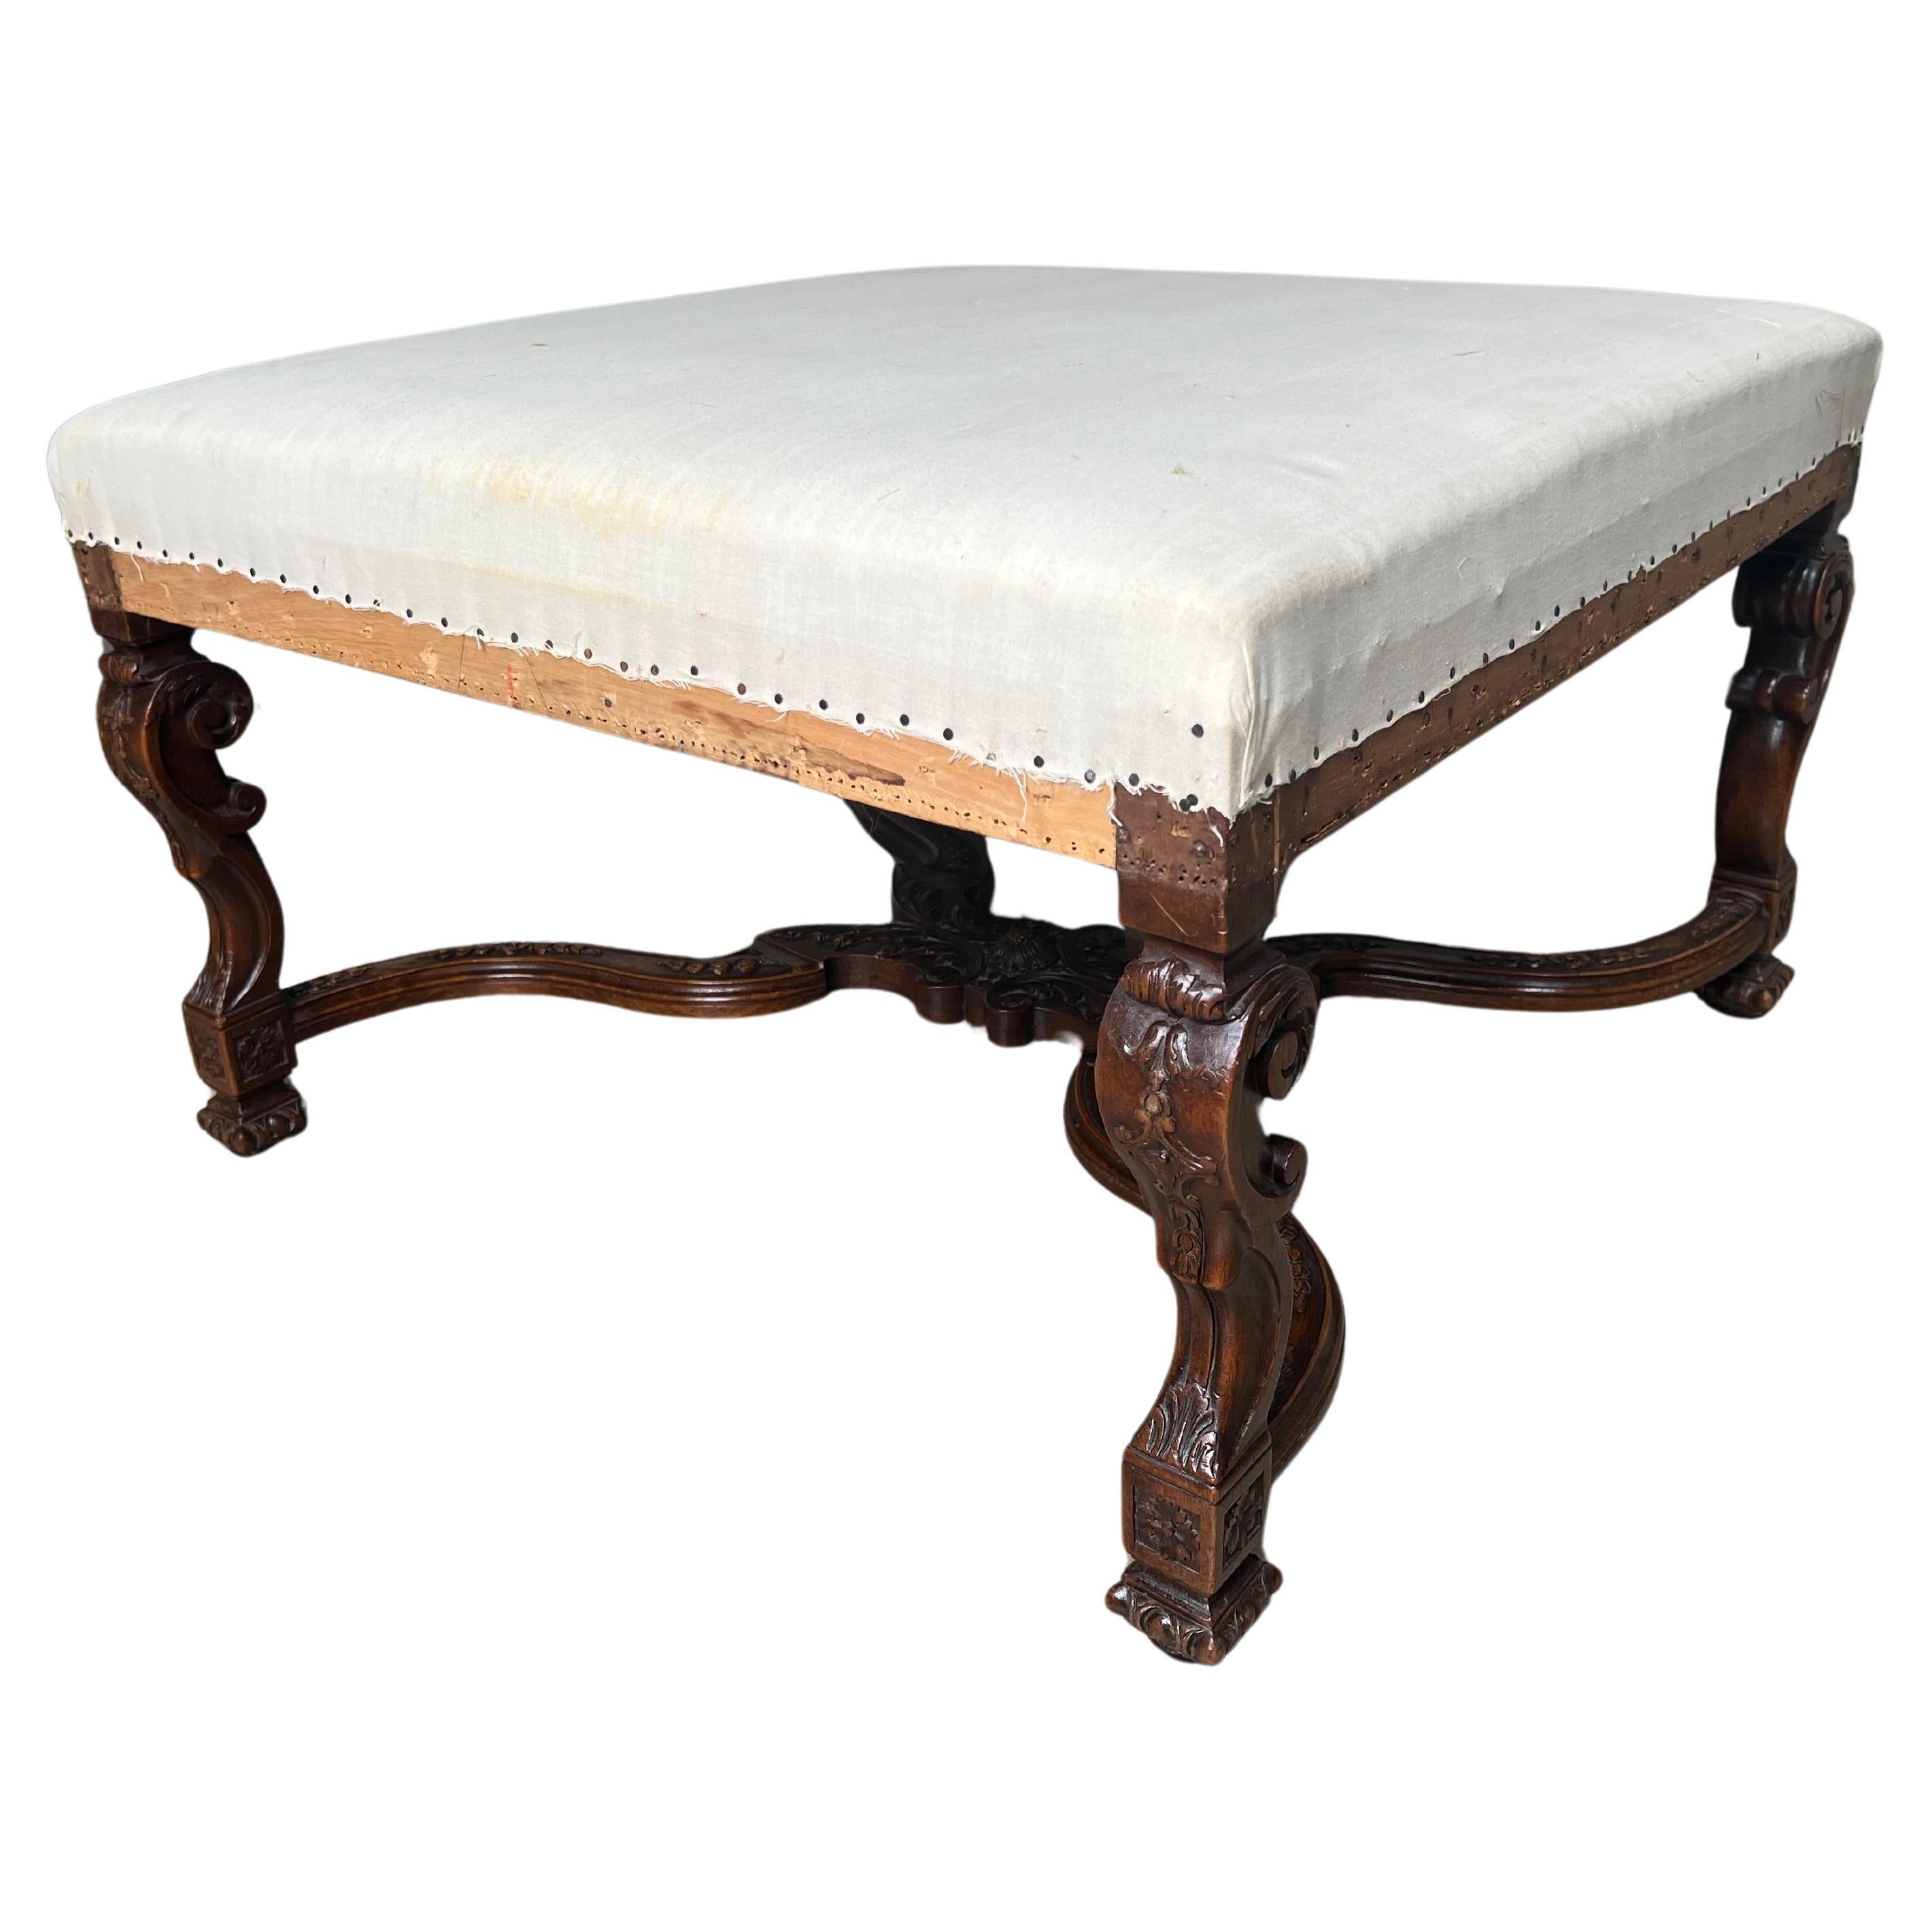 Large 19th Century French Regence Style Carved Walnut Ottoman